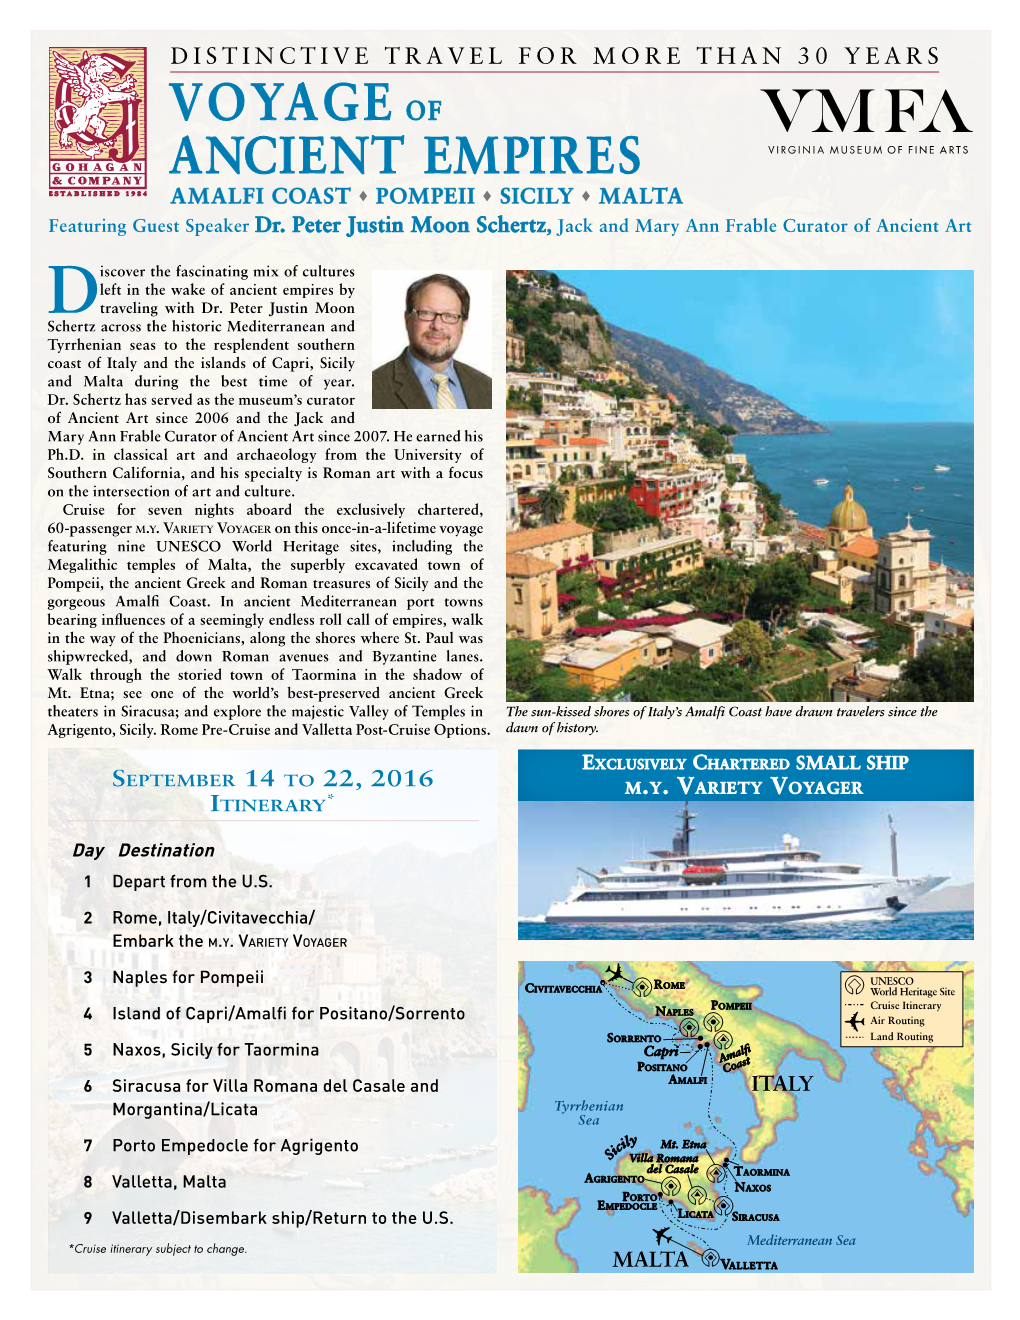 VOYAGE of ANCIENT EMPIRES E S TABLISHED 1984 AMALFI COAST ♦ POMPEII ♦ SICILY ♦ MALTA Featuring Guest Speaker Dr